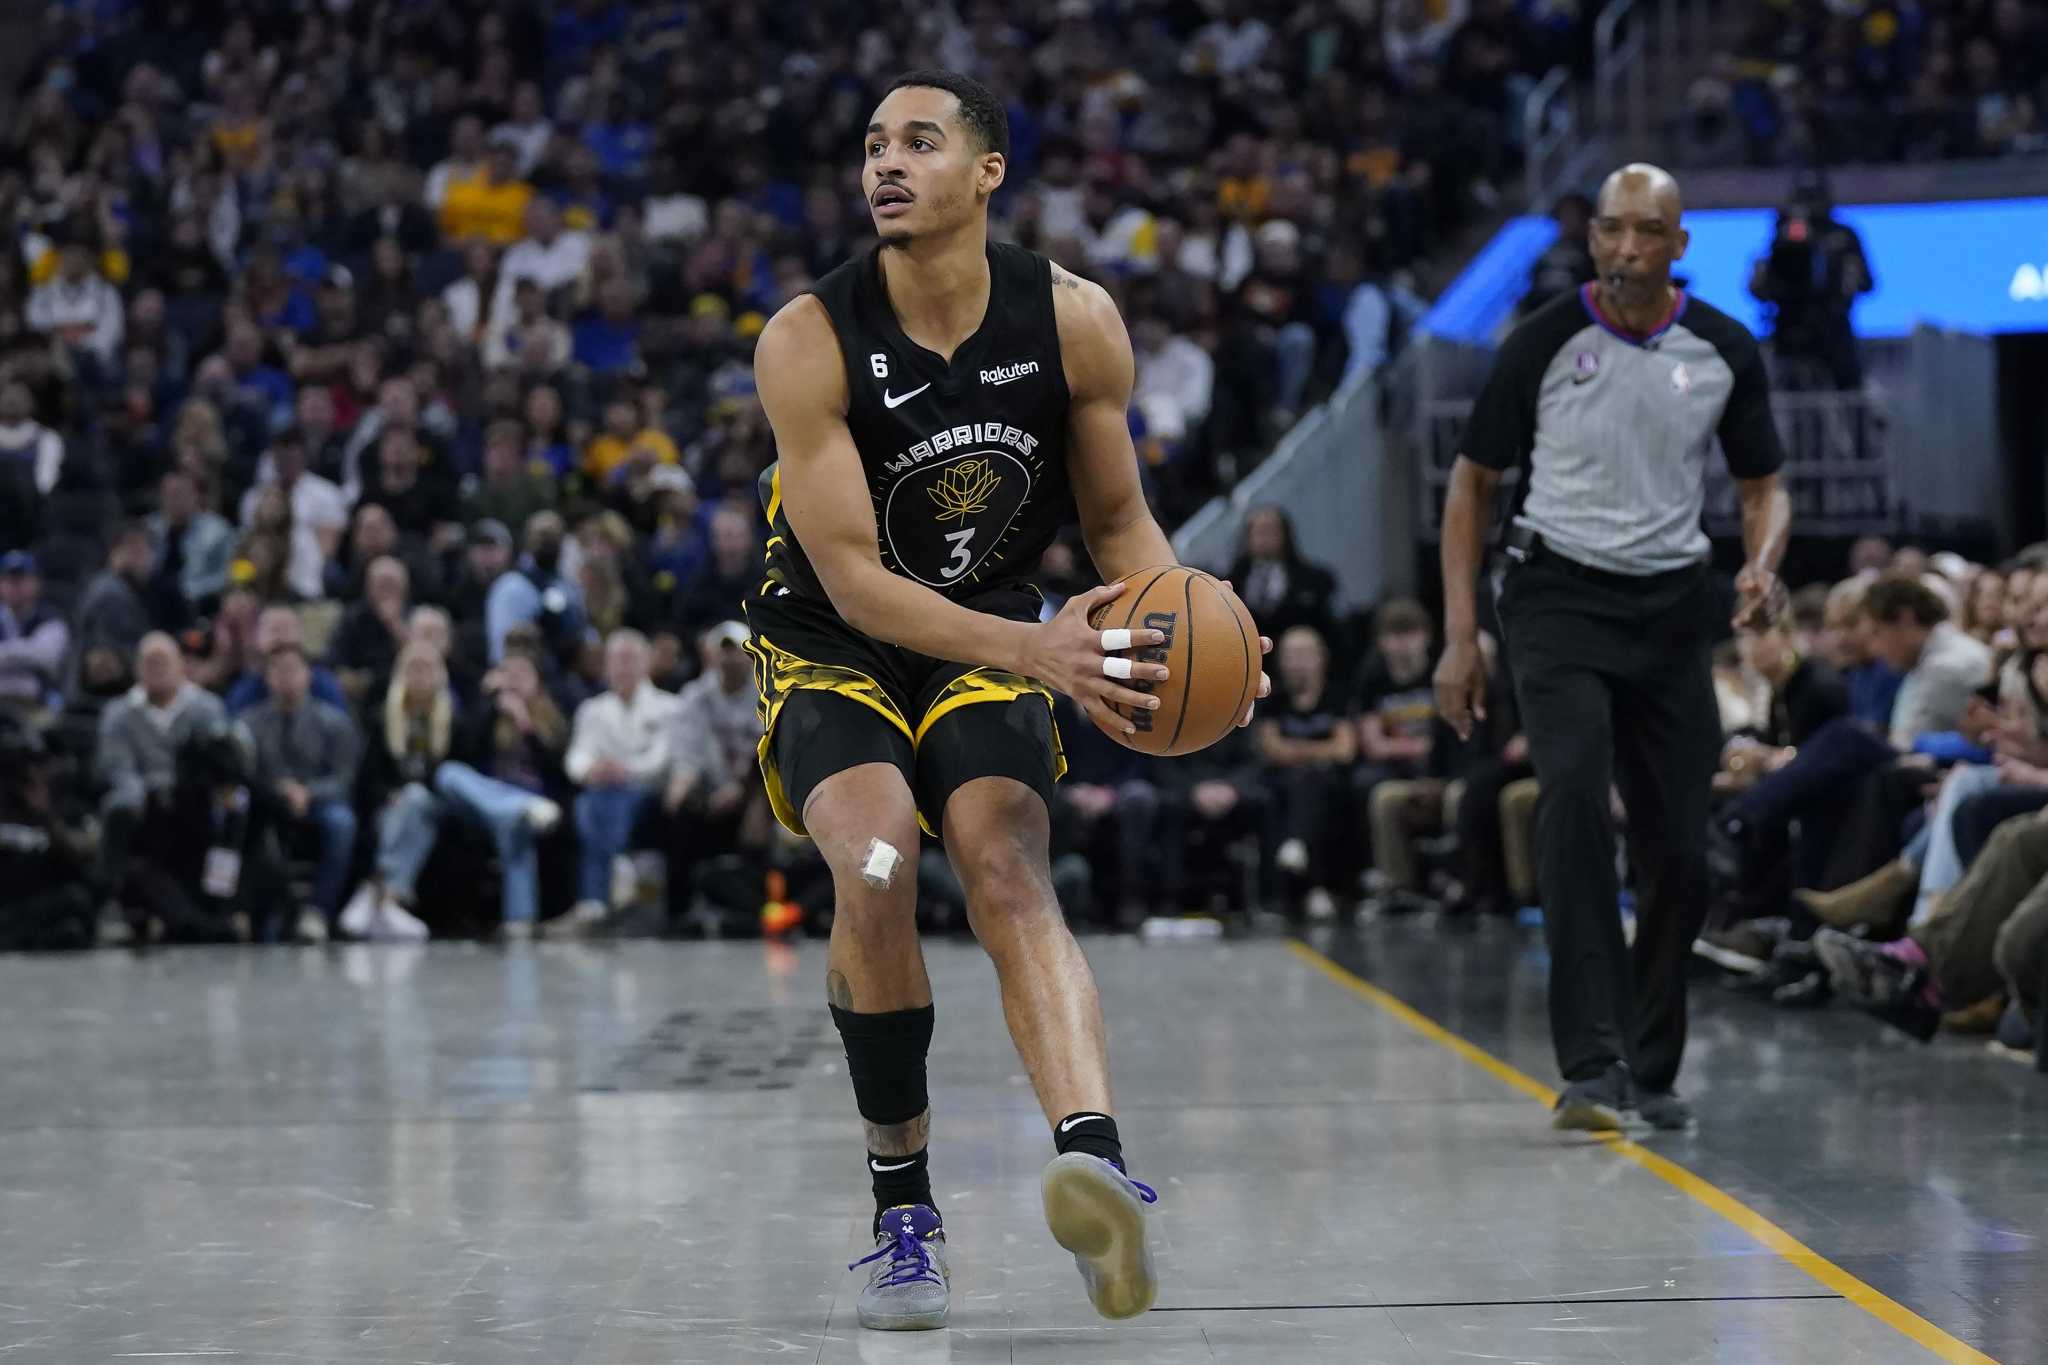 Jordan Poole improving with Warriors second unit but will his